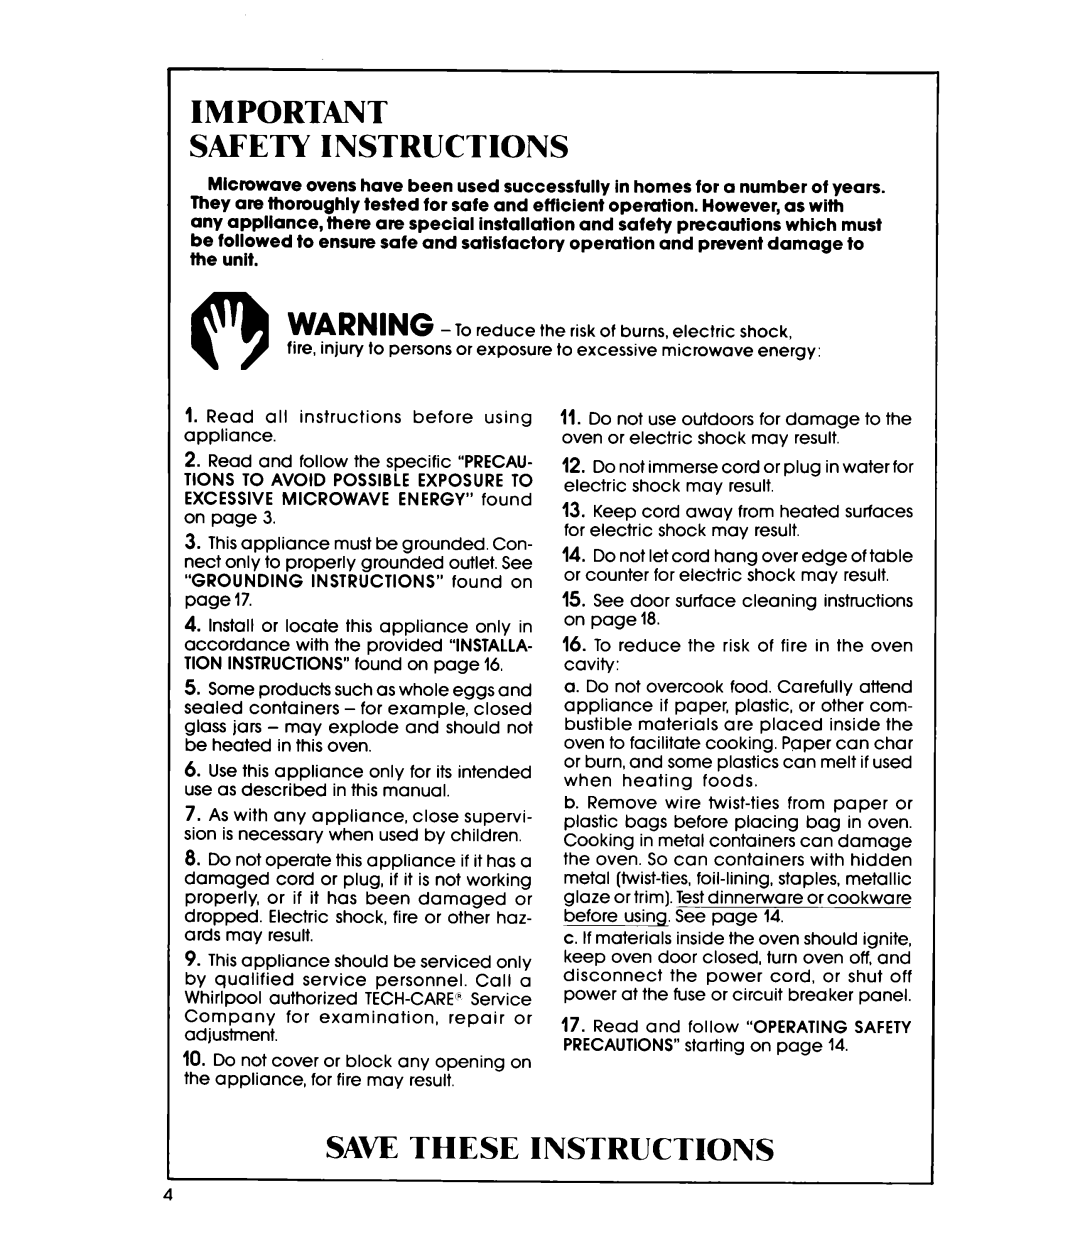 Whirlpool MW850EXP, MW85OOXP manual Safety Instructions, Saw These Instructions 